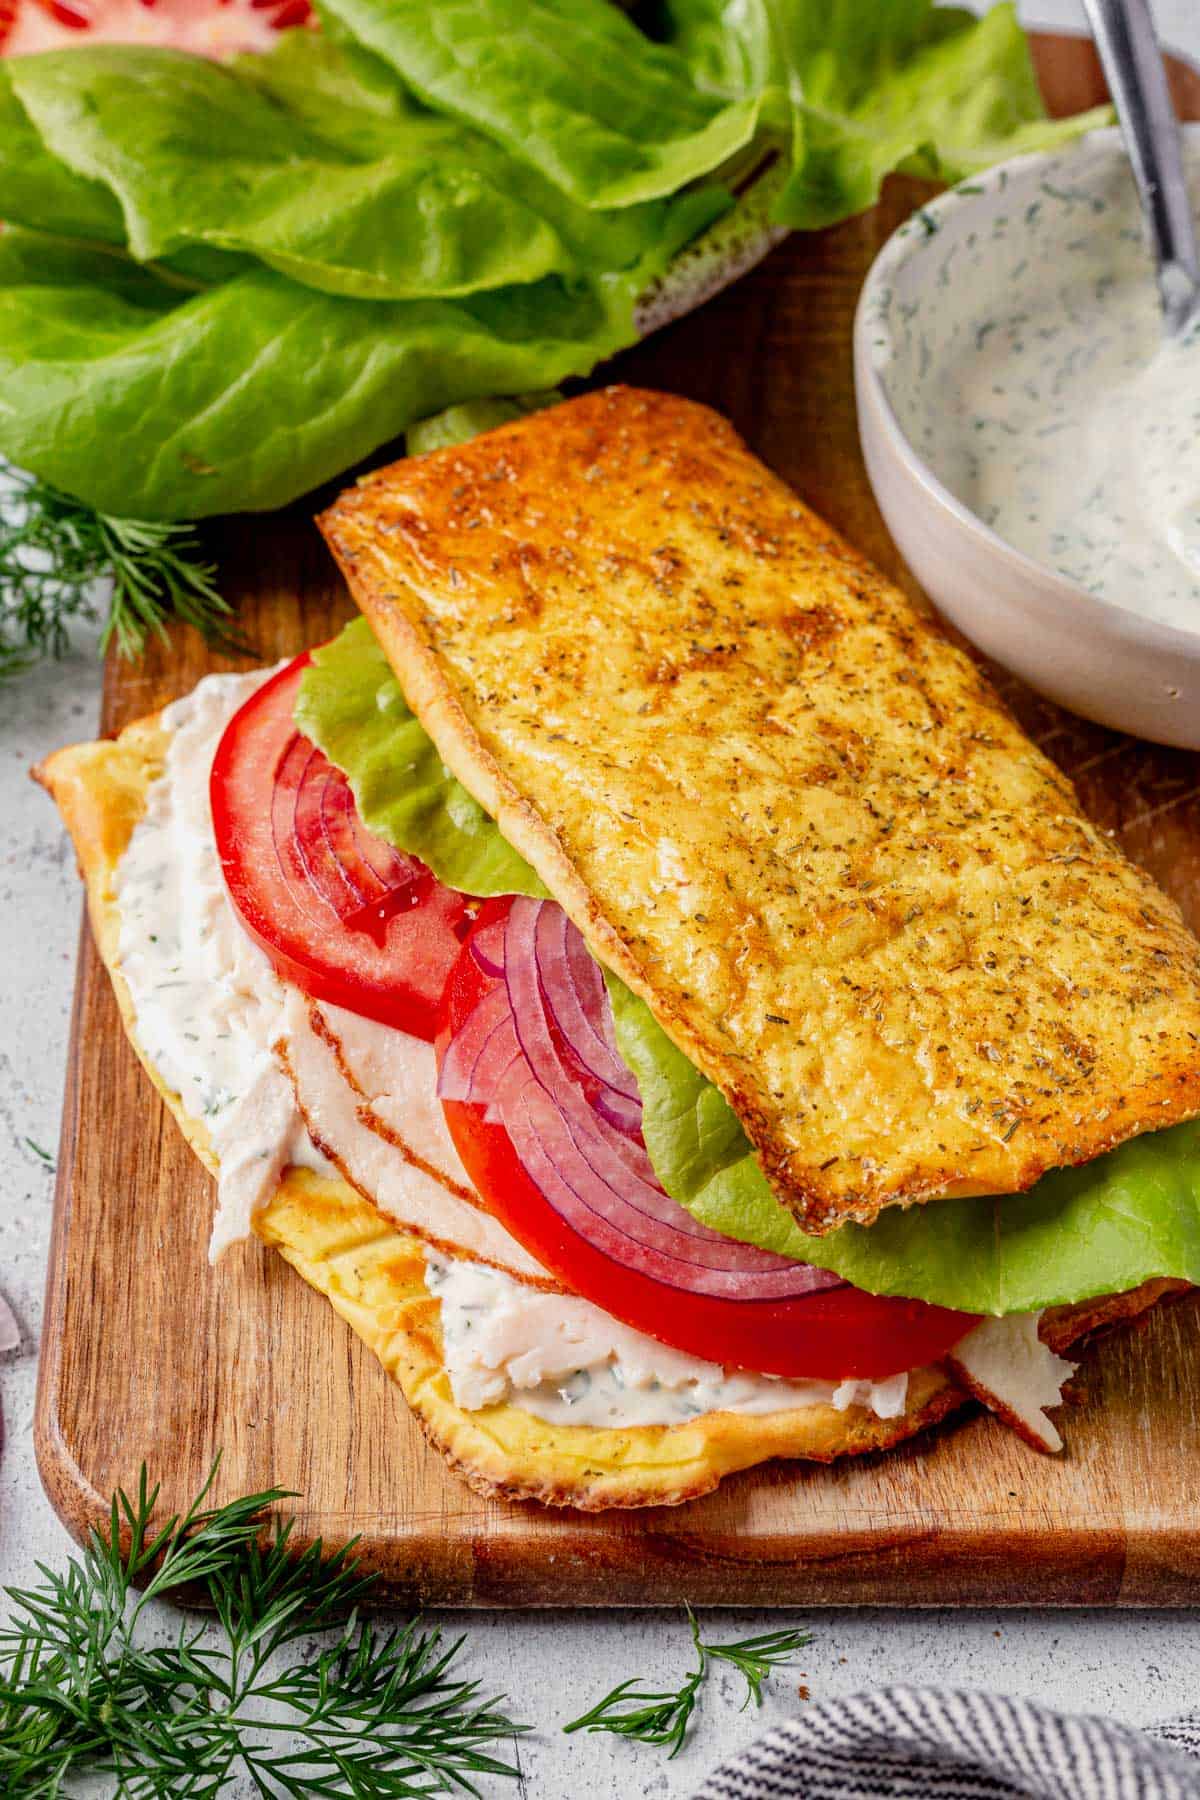 cottage cheese flatbread sandwich with lettuce and tomato